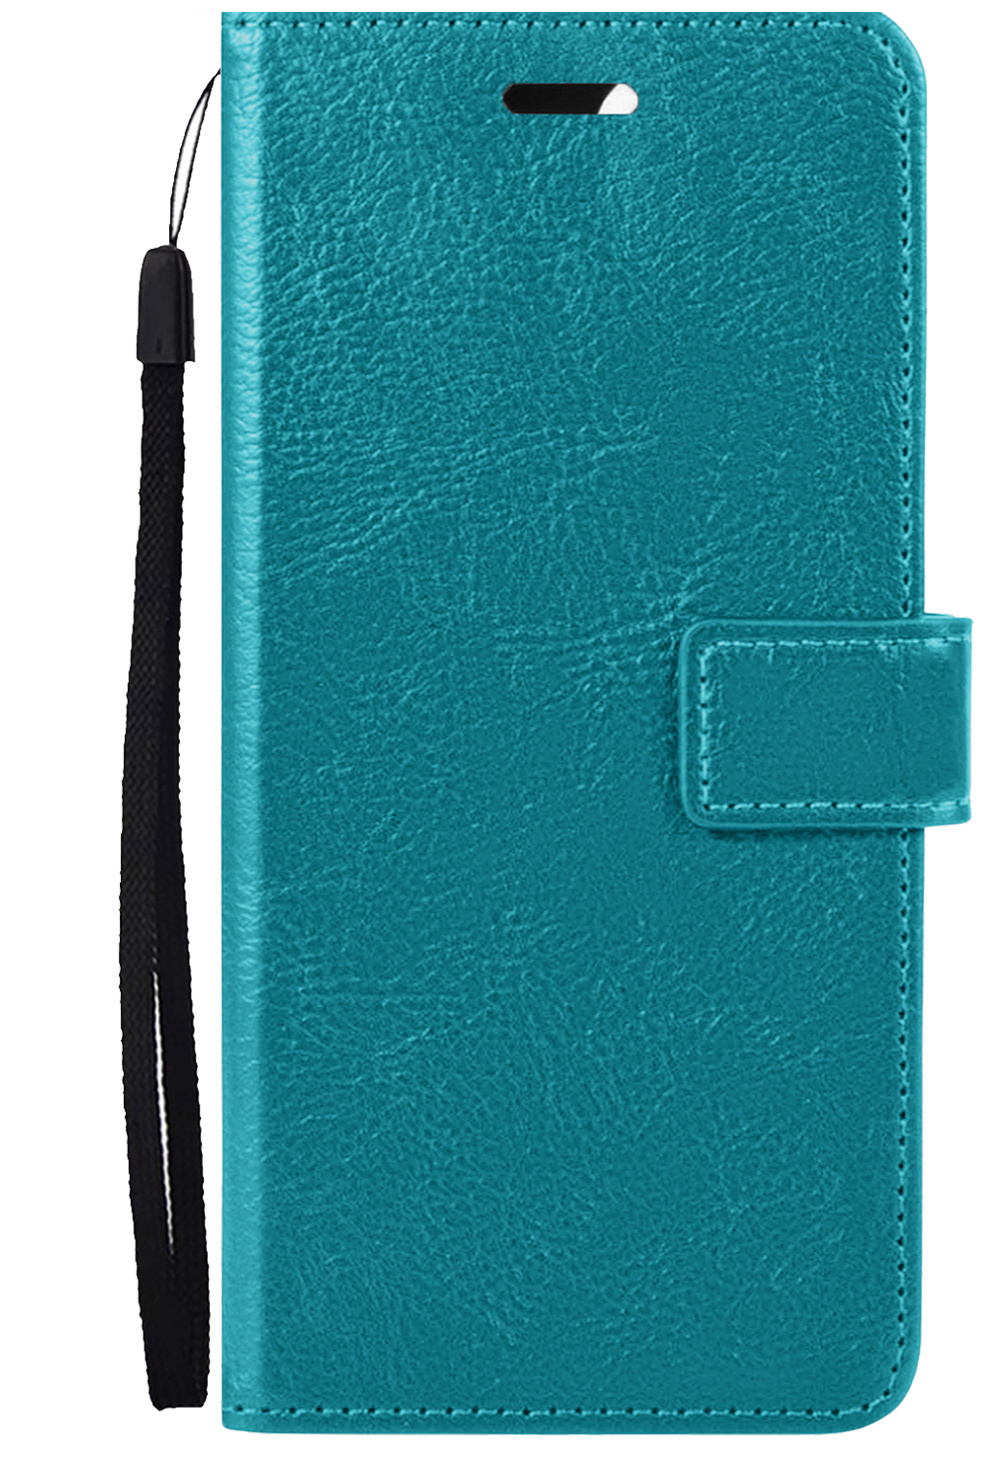 Samsung Galaxy S22 Ultra Hoesje Bookcase Met 2x Screenprotector - Samsung Galaxy S22 Ultra 2x Screenprotector - Samsung Galaxy S22 Ultra Book Case Met 2x Screenprotector - Turquoise